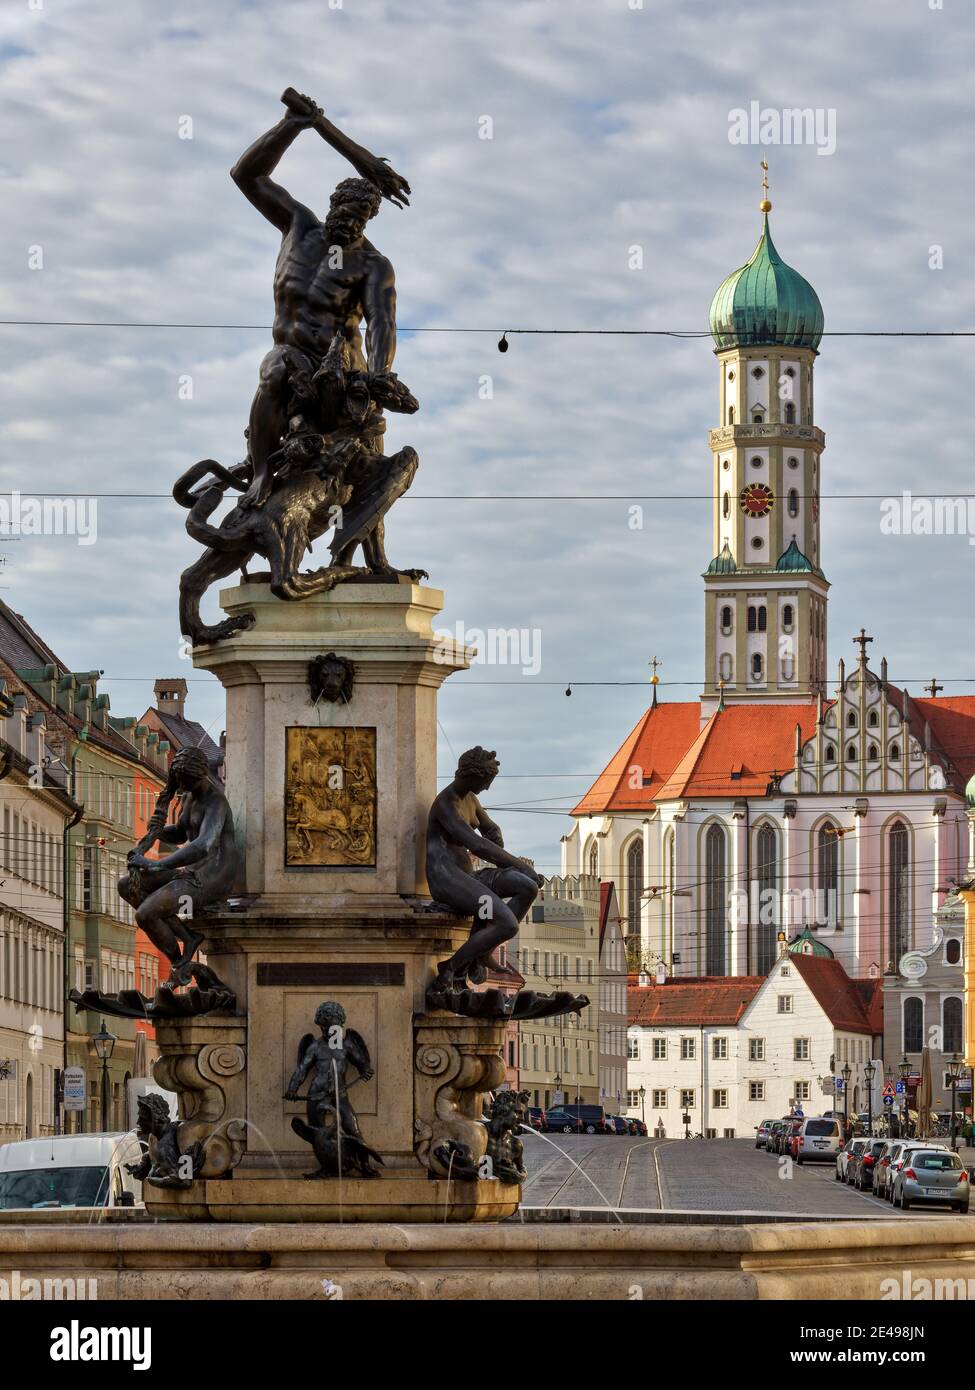 Fountain, cobblestone pavement, boulevard, imperial mile, patrician houses, church, basilica, bronze, bronze statues, place of worship, place of interest, monument, listed, historic old town, old town Stock Photo